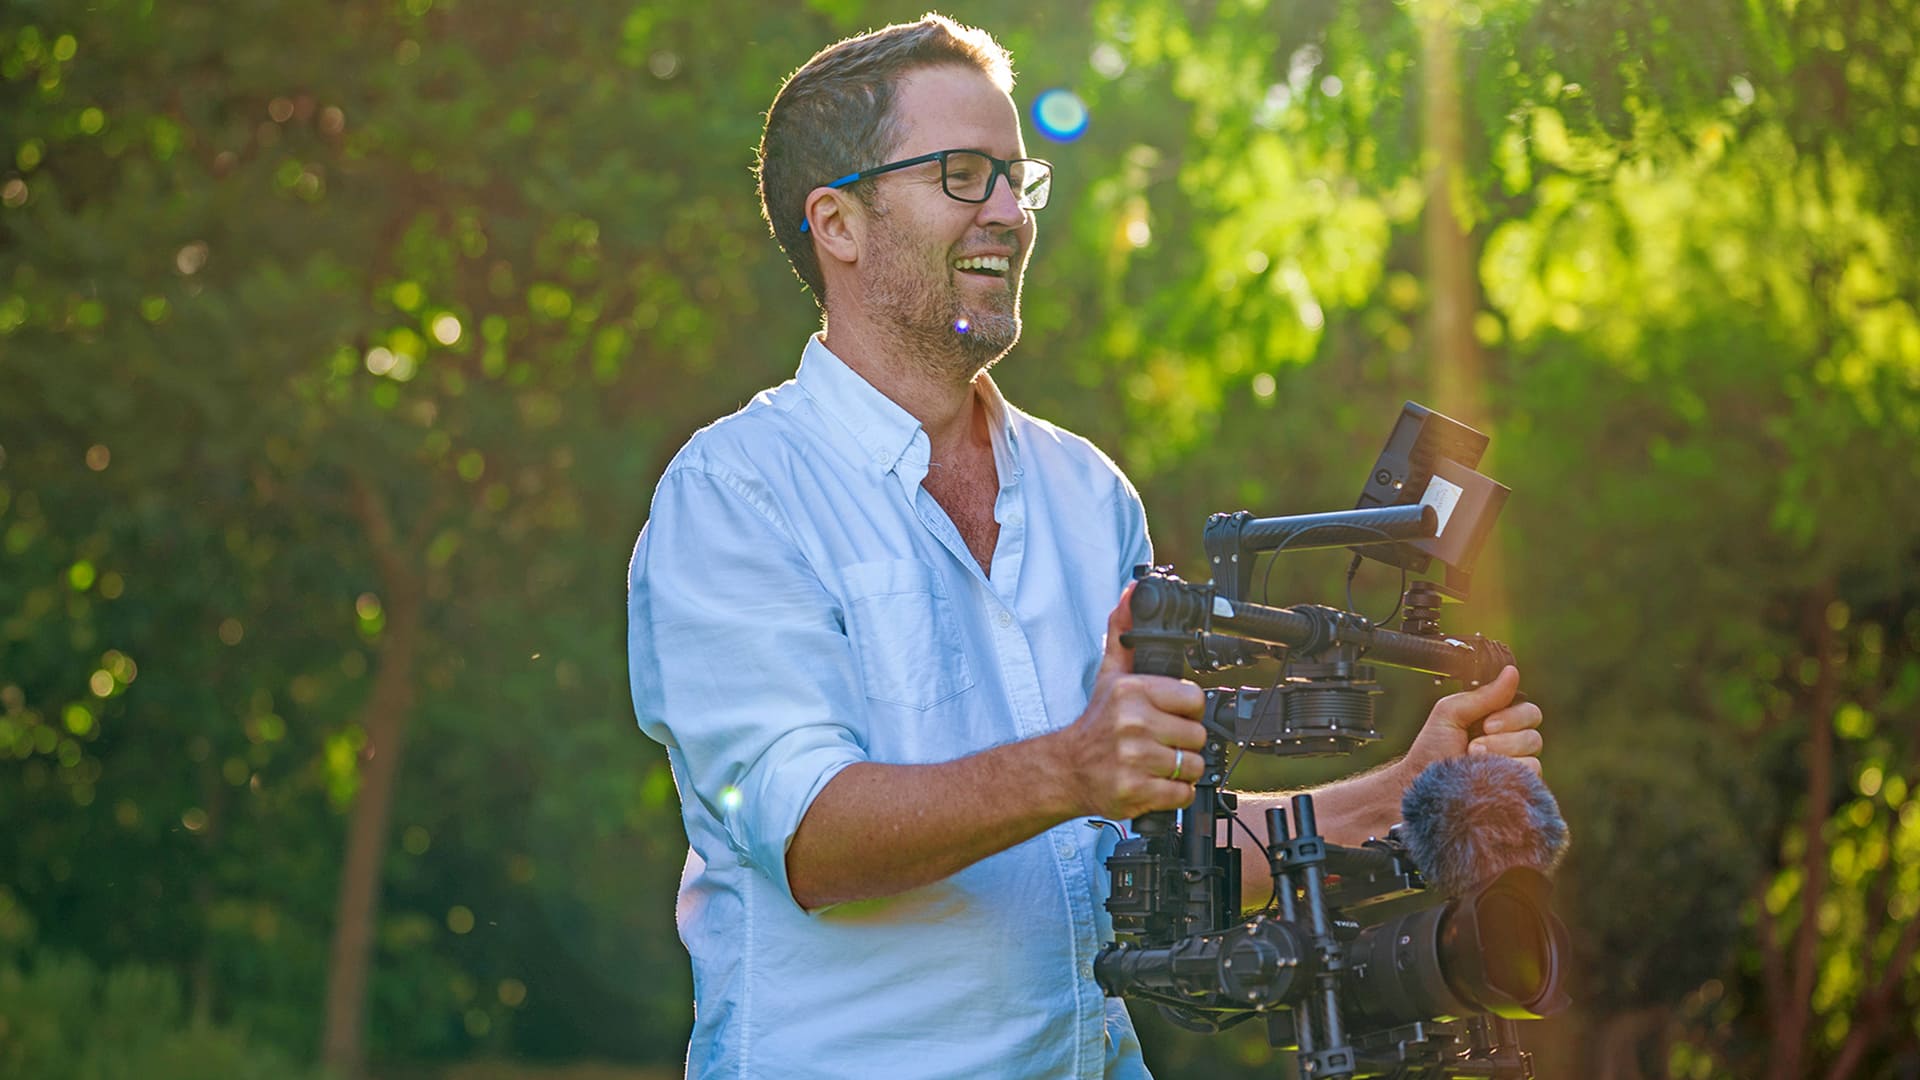 A professional videographer based in Adelaide smiling as he works with a gimbal